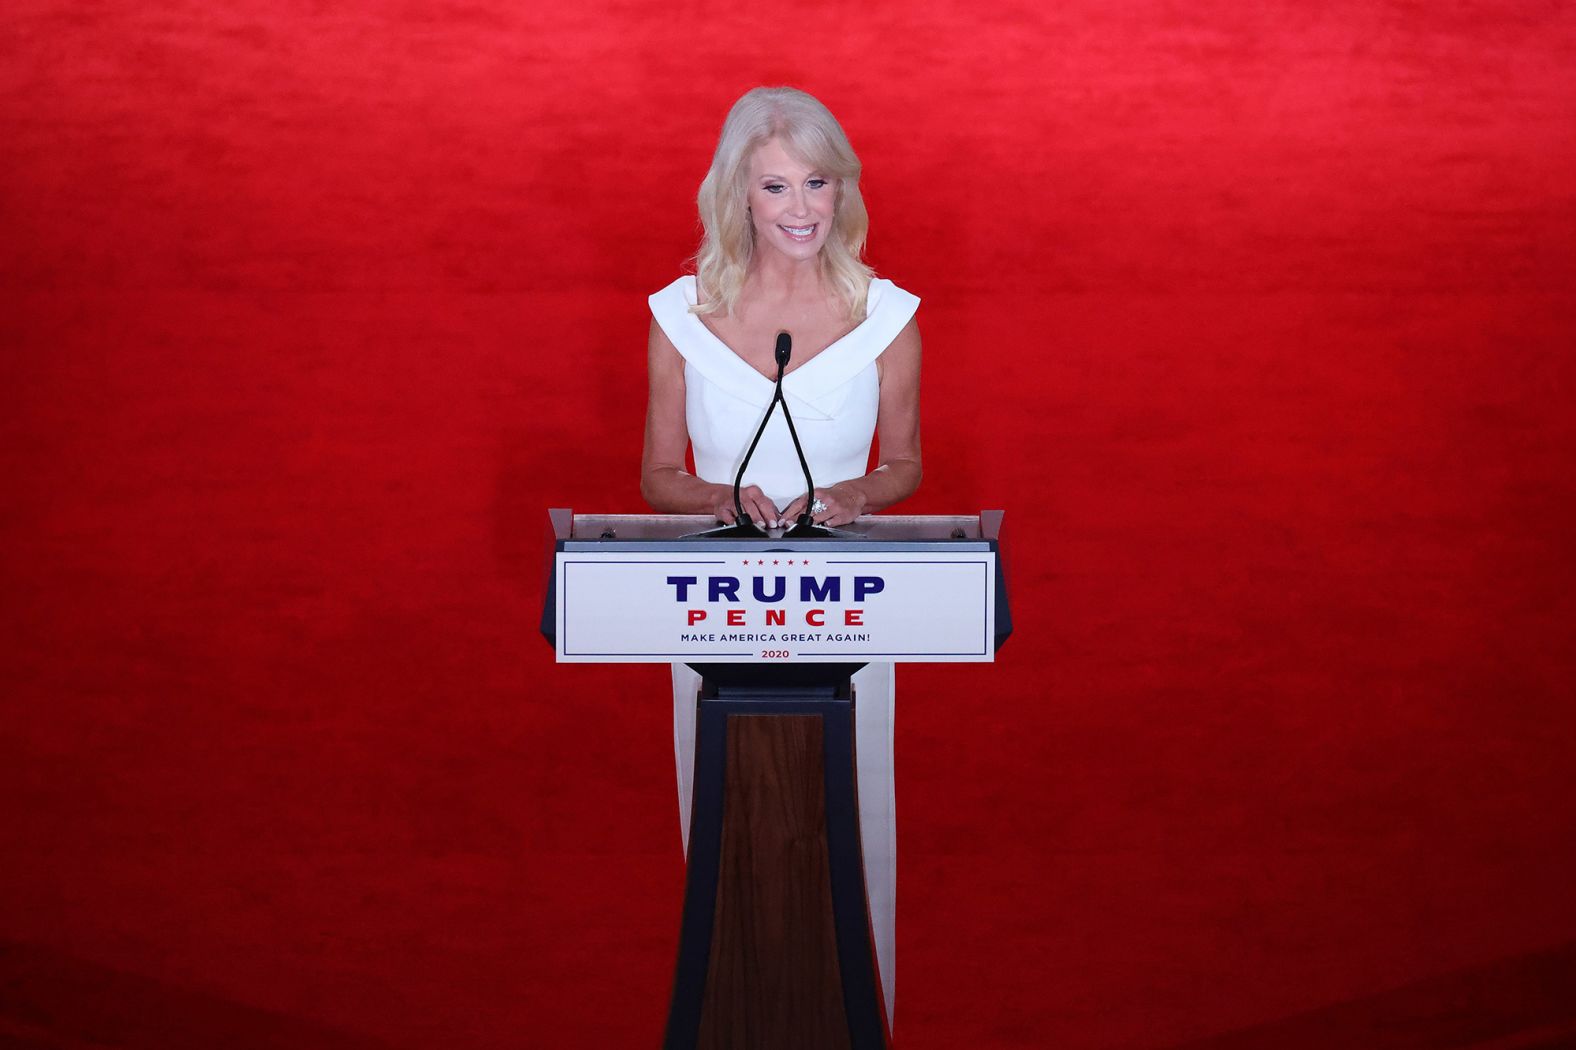 During her speech Wednesday, White House counselor Kellyanne Conway<a href="https://www.cnn.com/politics/live-news/rnc-2020-day-3/h_c1d96bc3a659ae14ae1a1a02f51343a7" target="_blank"> tried to make the case that Trump is a champion for women.</a> She said that for decades Trump has "elevated women to senior positions in business and in government," and he "confides in and consults us, respects our opinions and insists that we are on equal footing with the men." Conway announced Sunday that she would be leaving the White House at the end of the month.